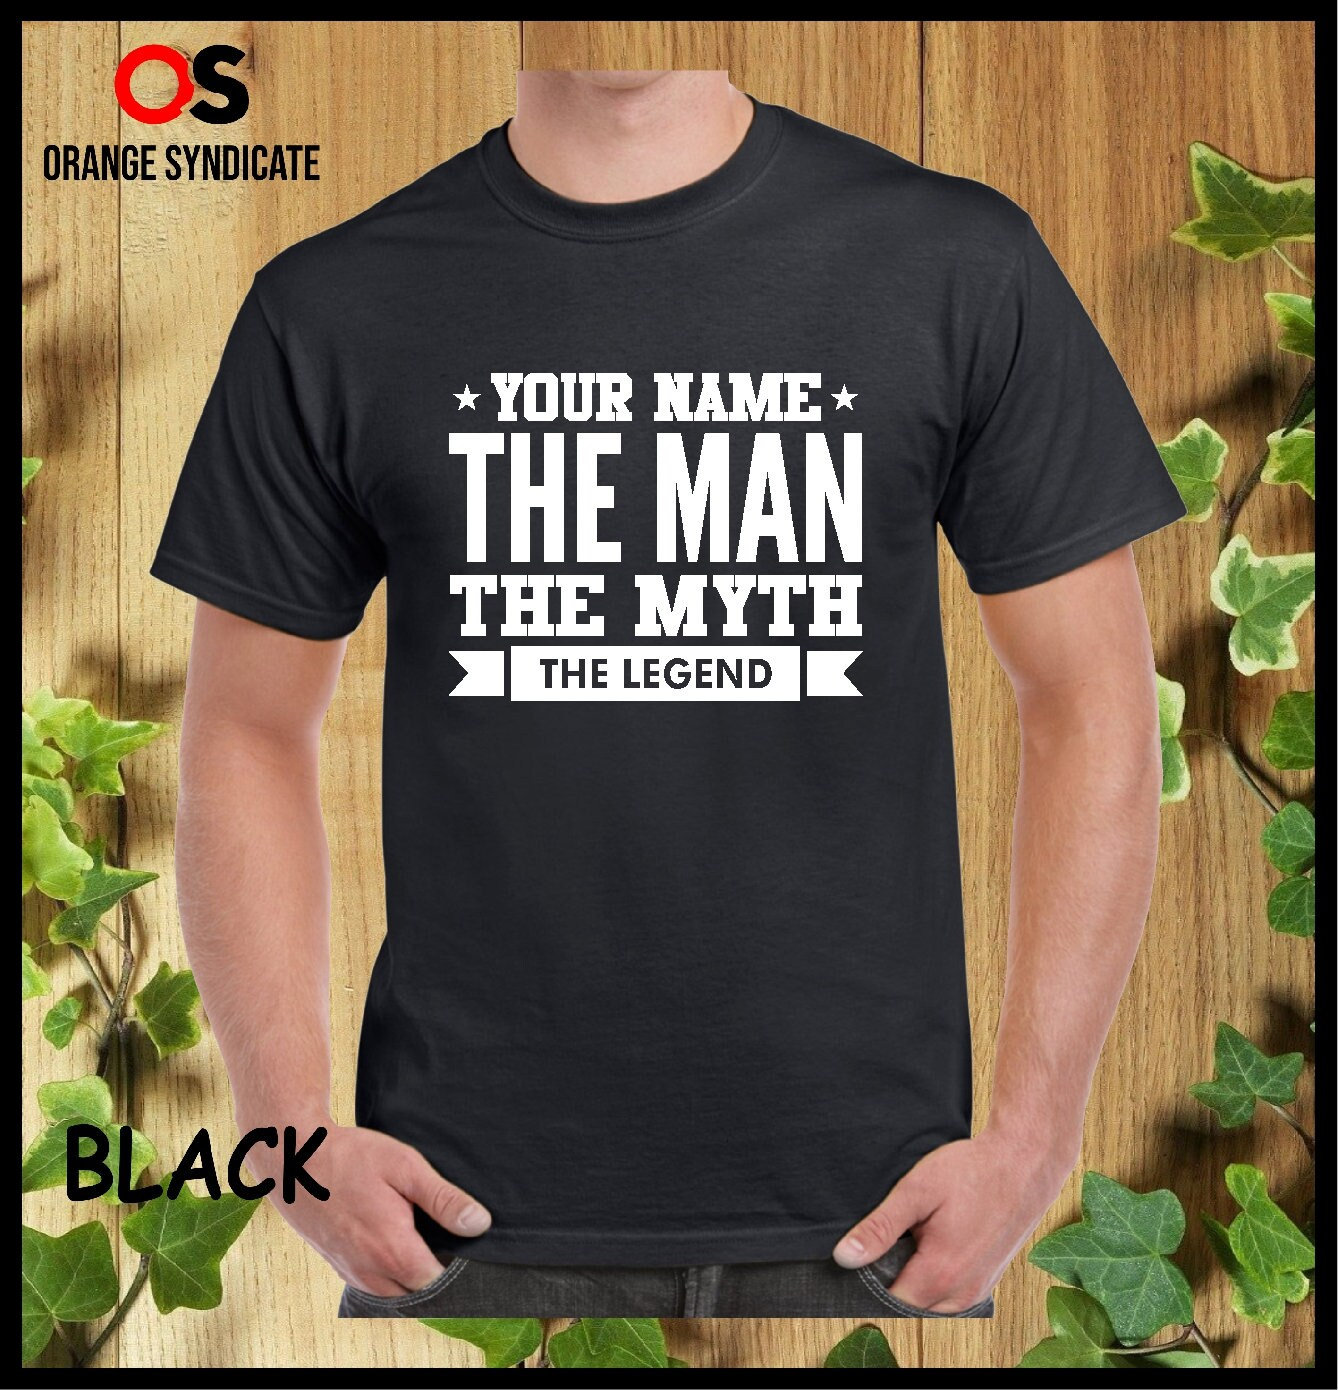 Personalised Printed T-Shirt Your Name The Man Myth Legend Boys Girls Present Mens Gift Unisex Tee Tops